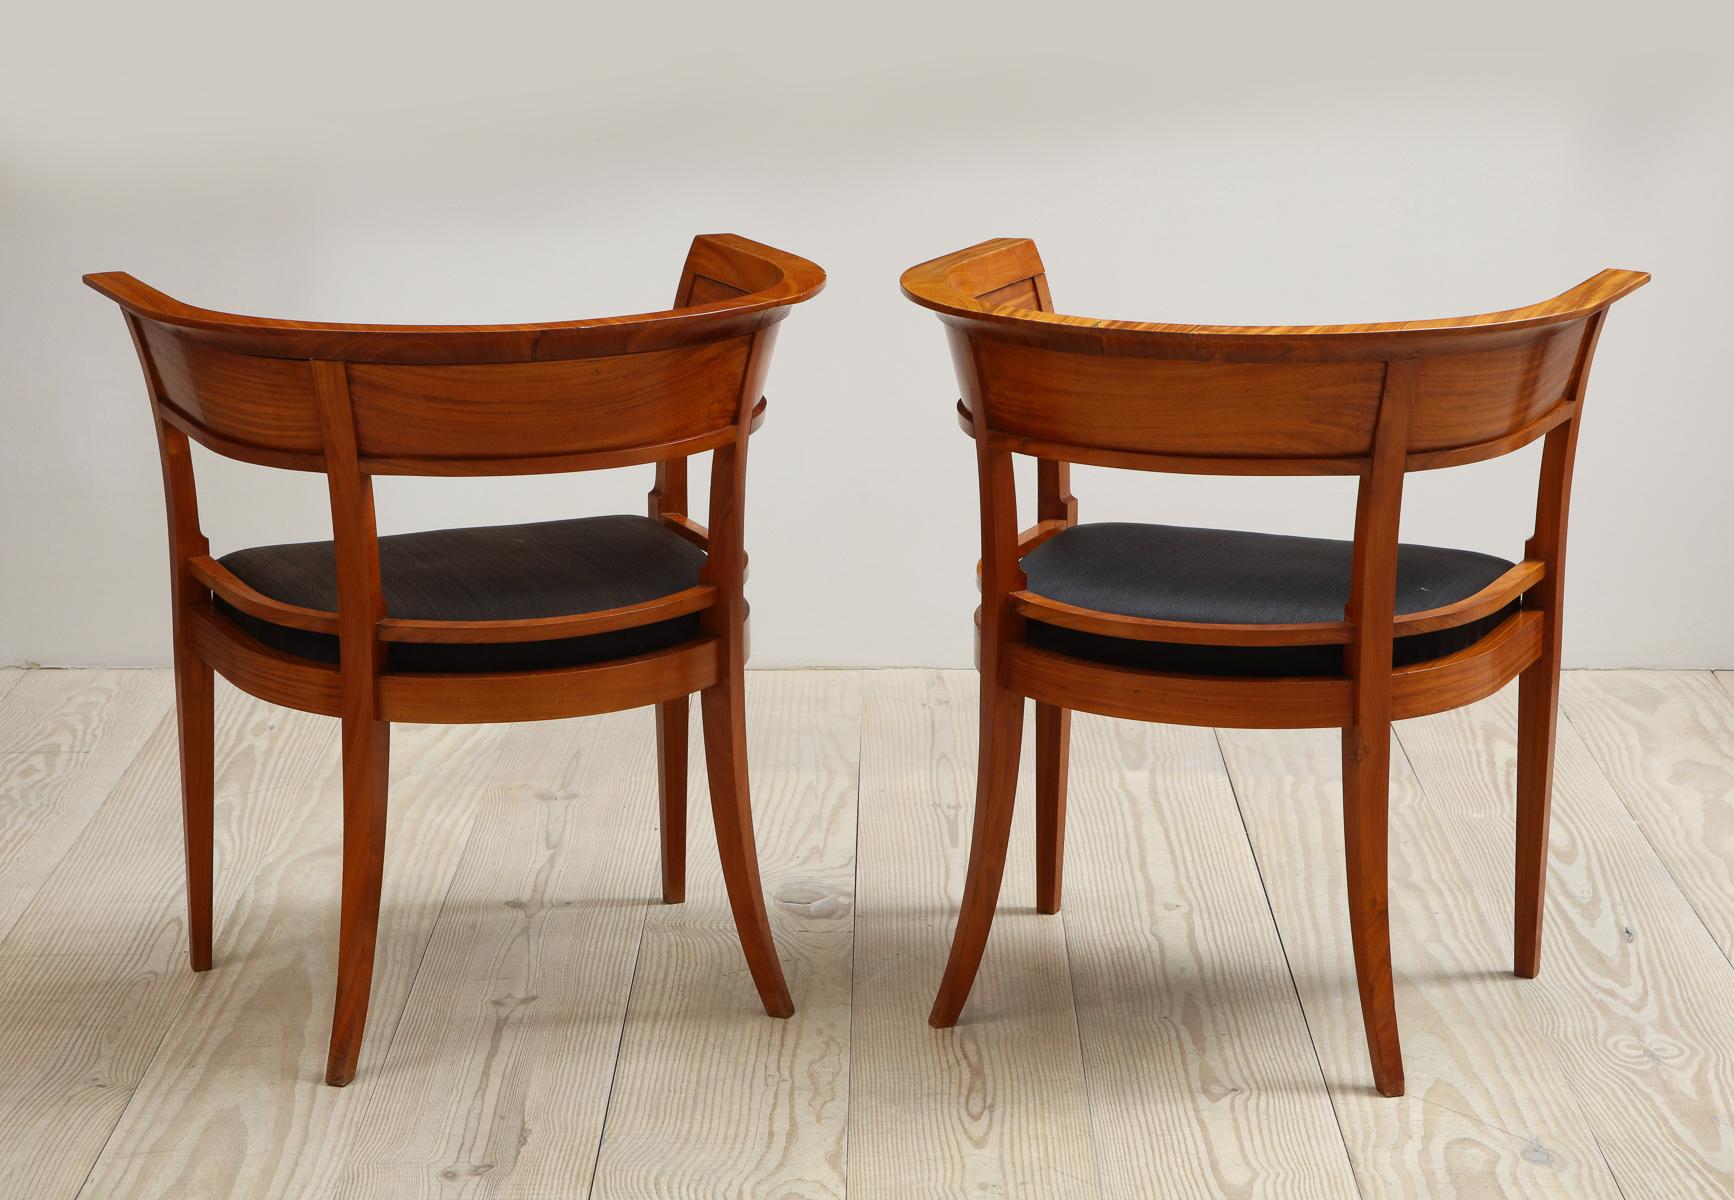 20th Century Kaare Klint, Rare Armchairs with Back Wood Panels, 1916